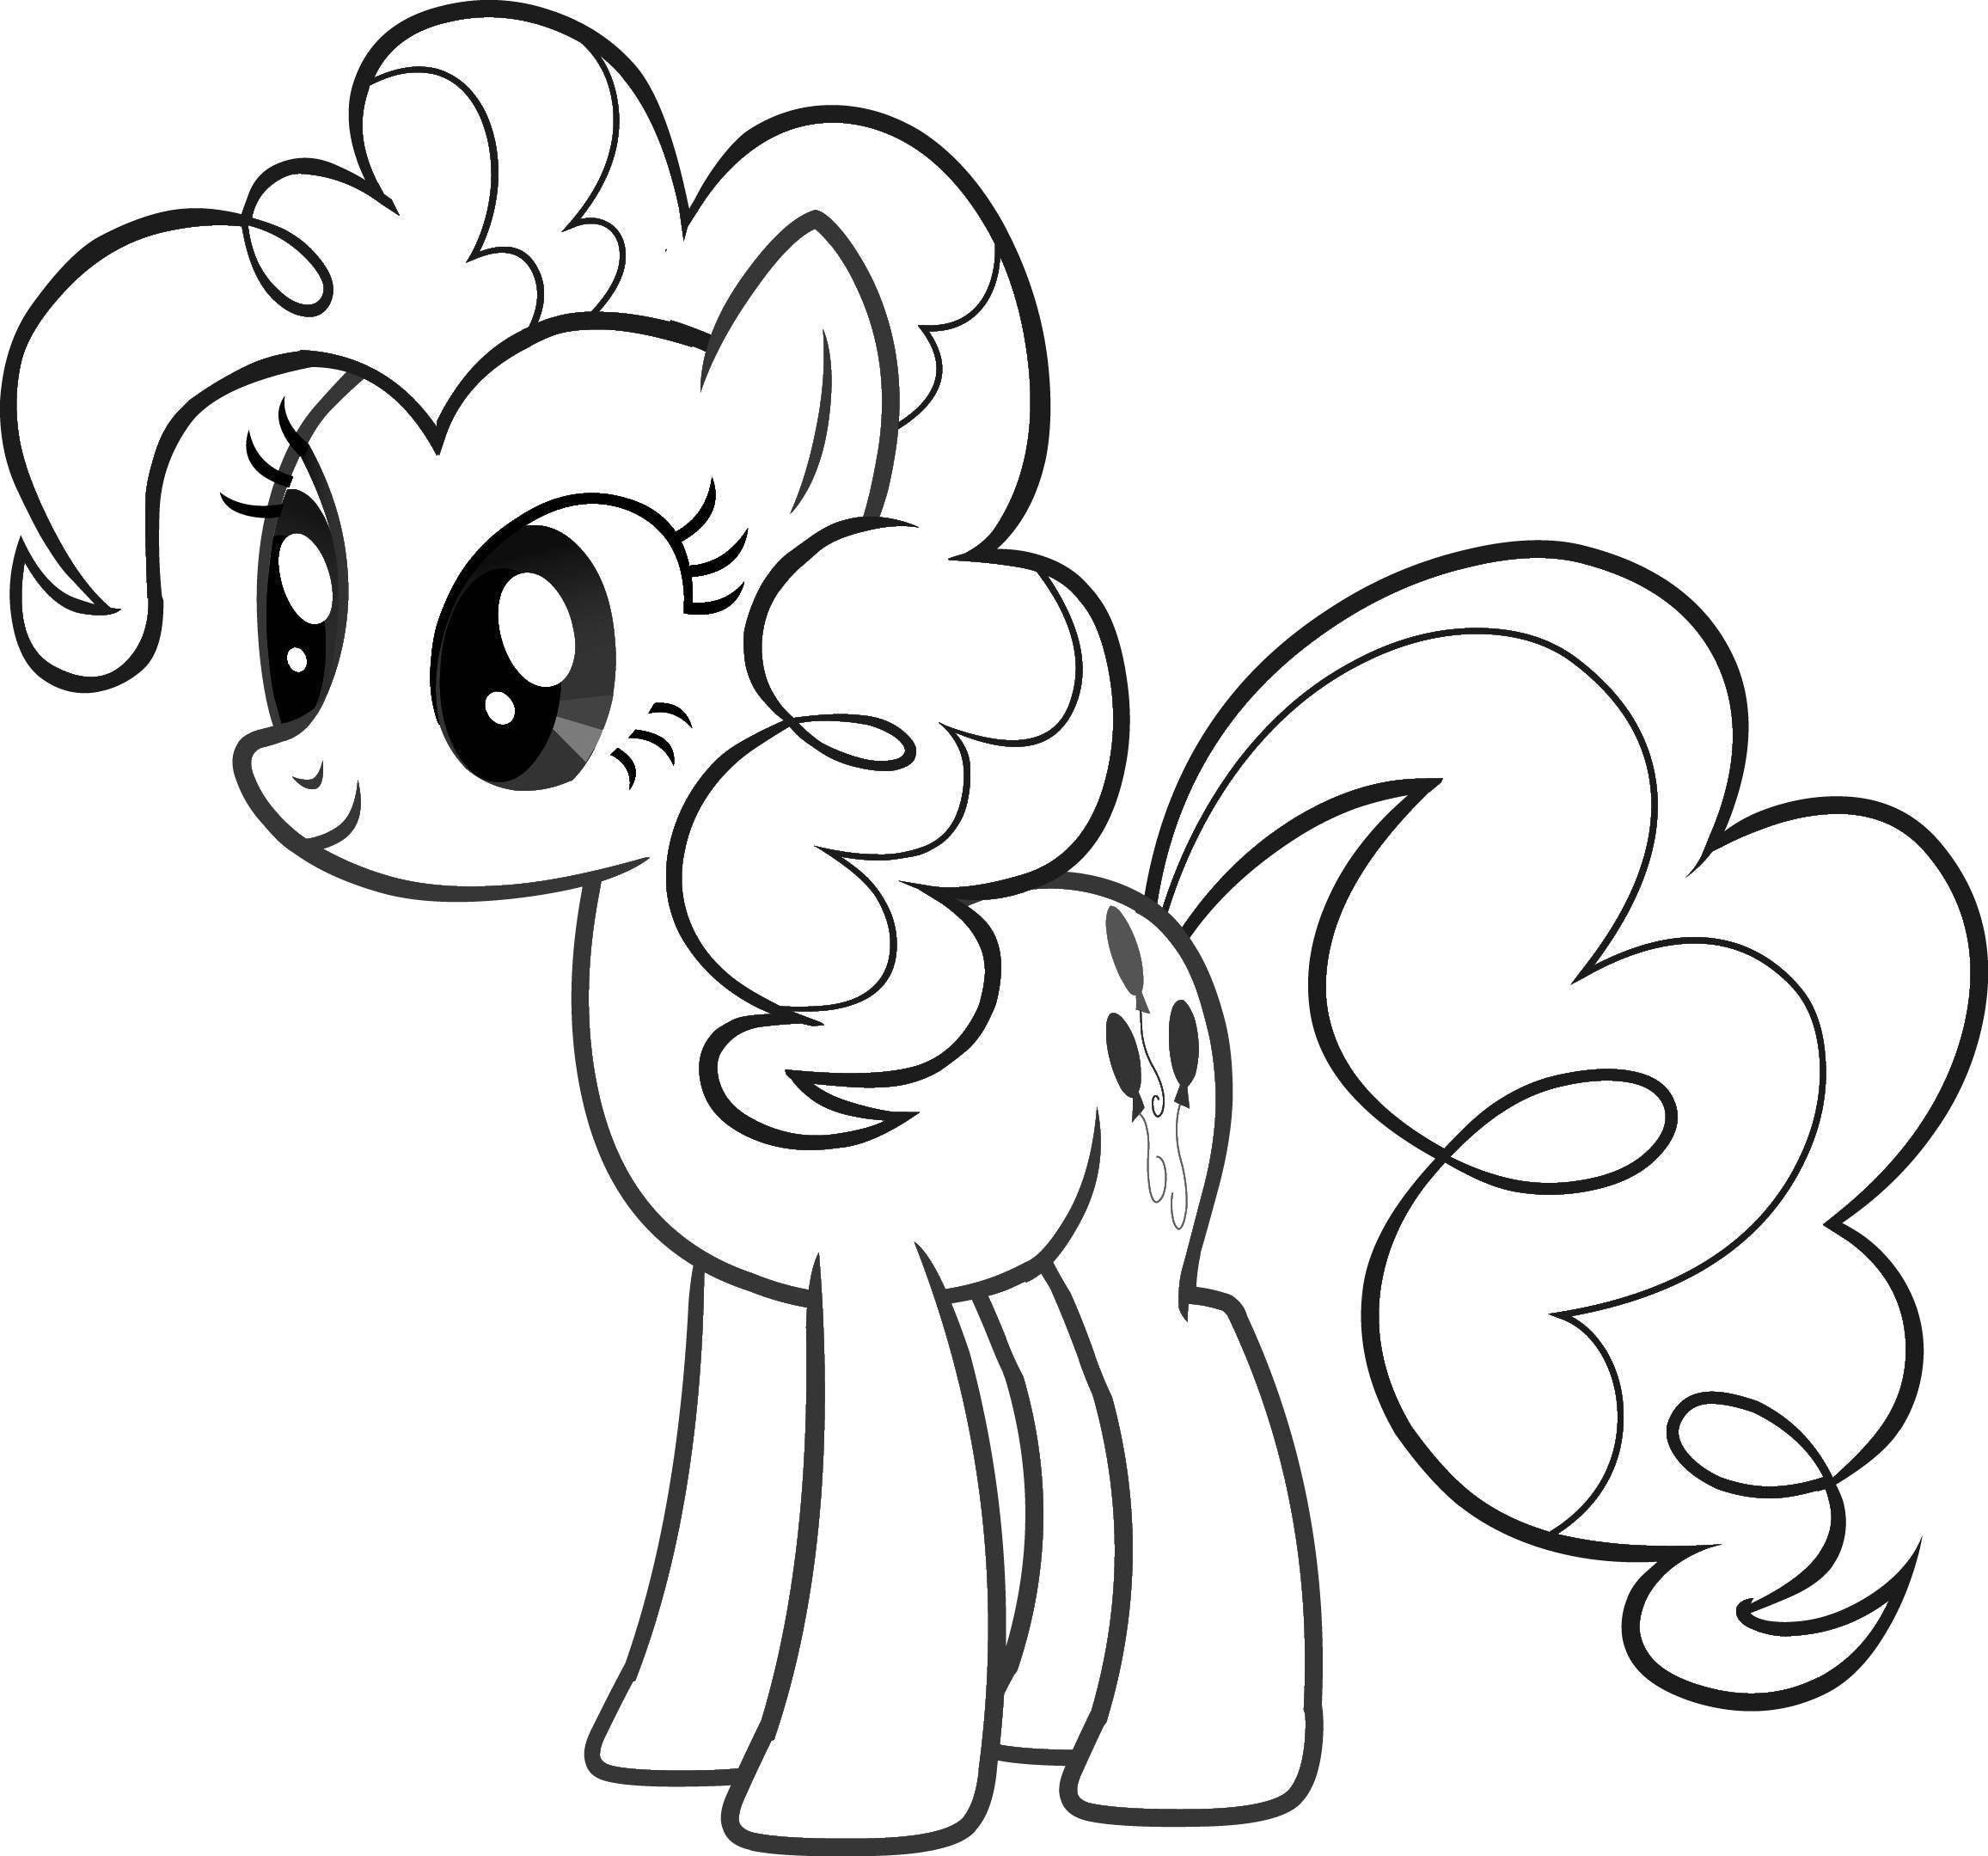 Coloring Ponies from my little pony . Category coloring. Tags:  Pony, My little pony .